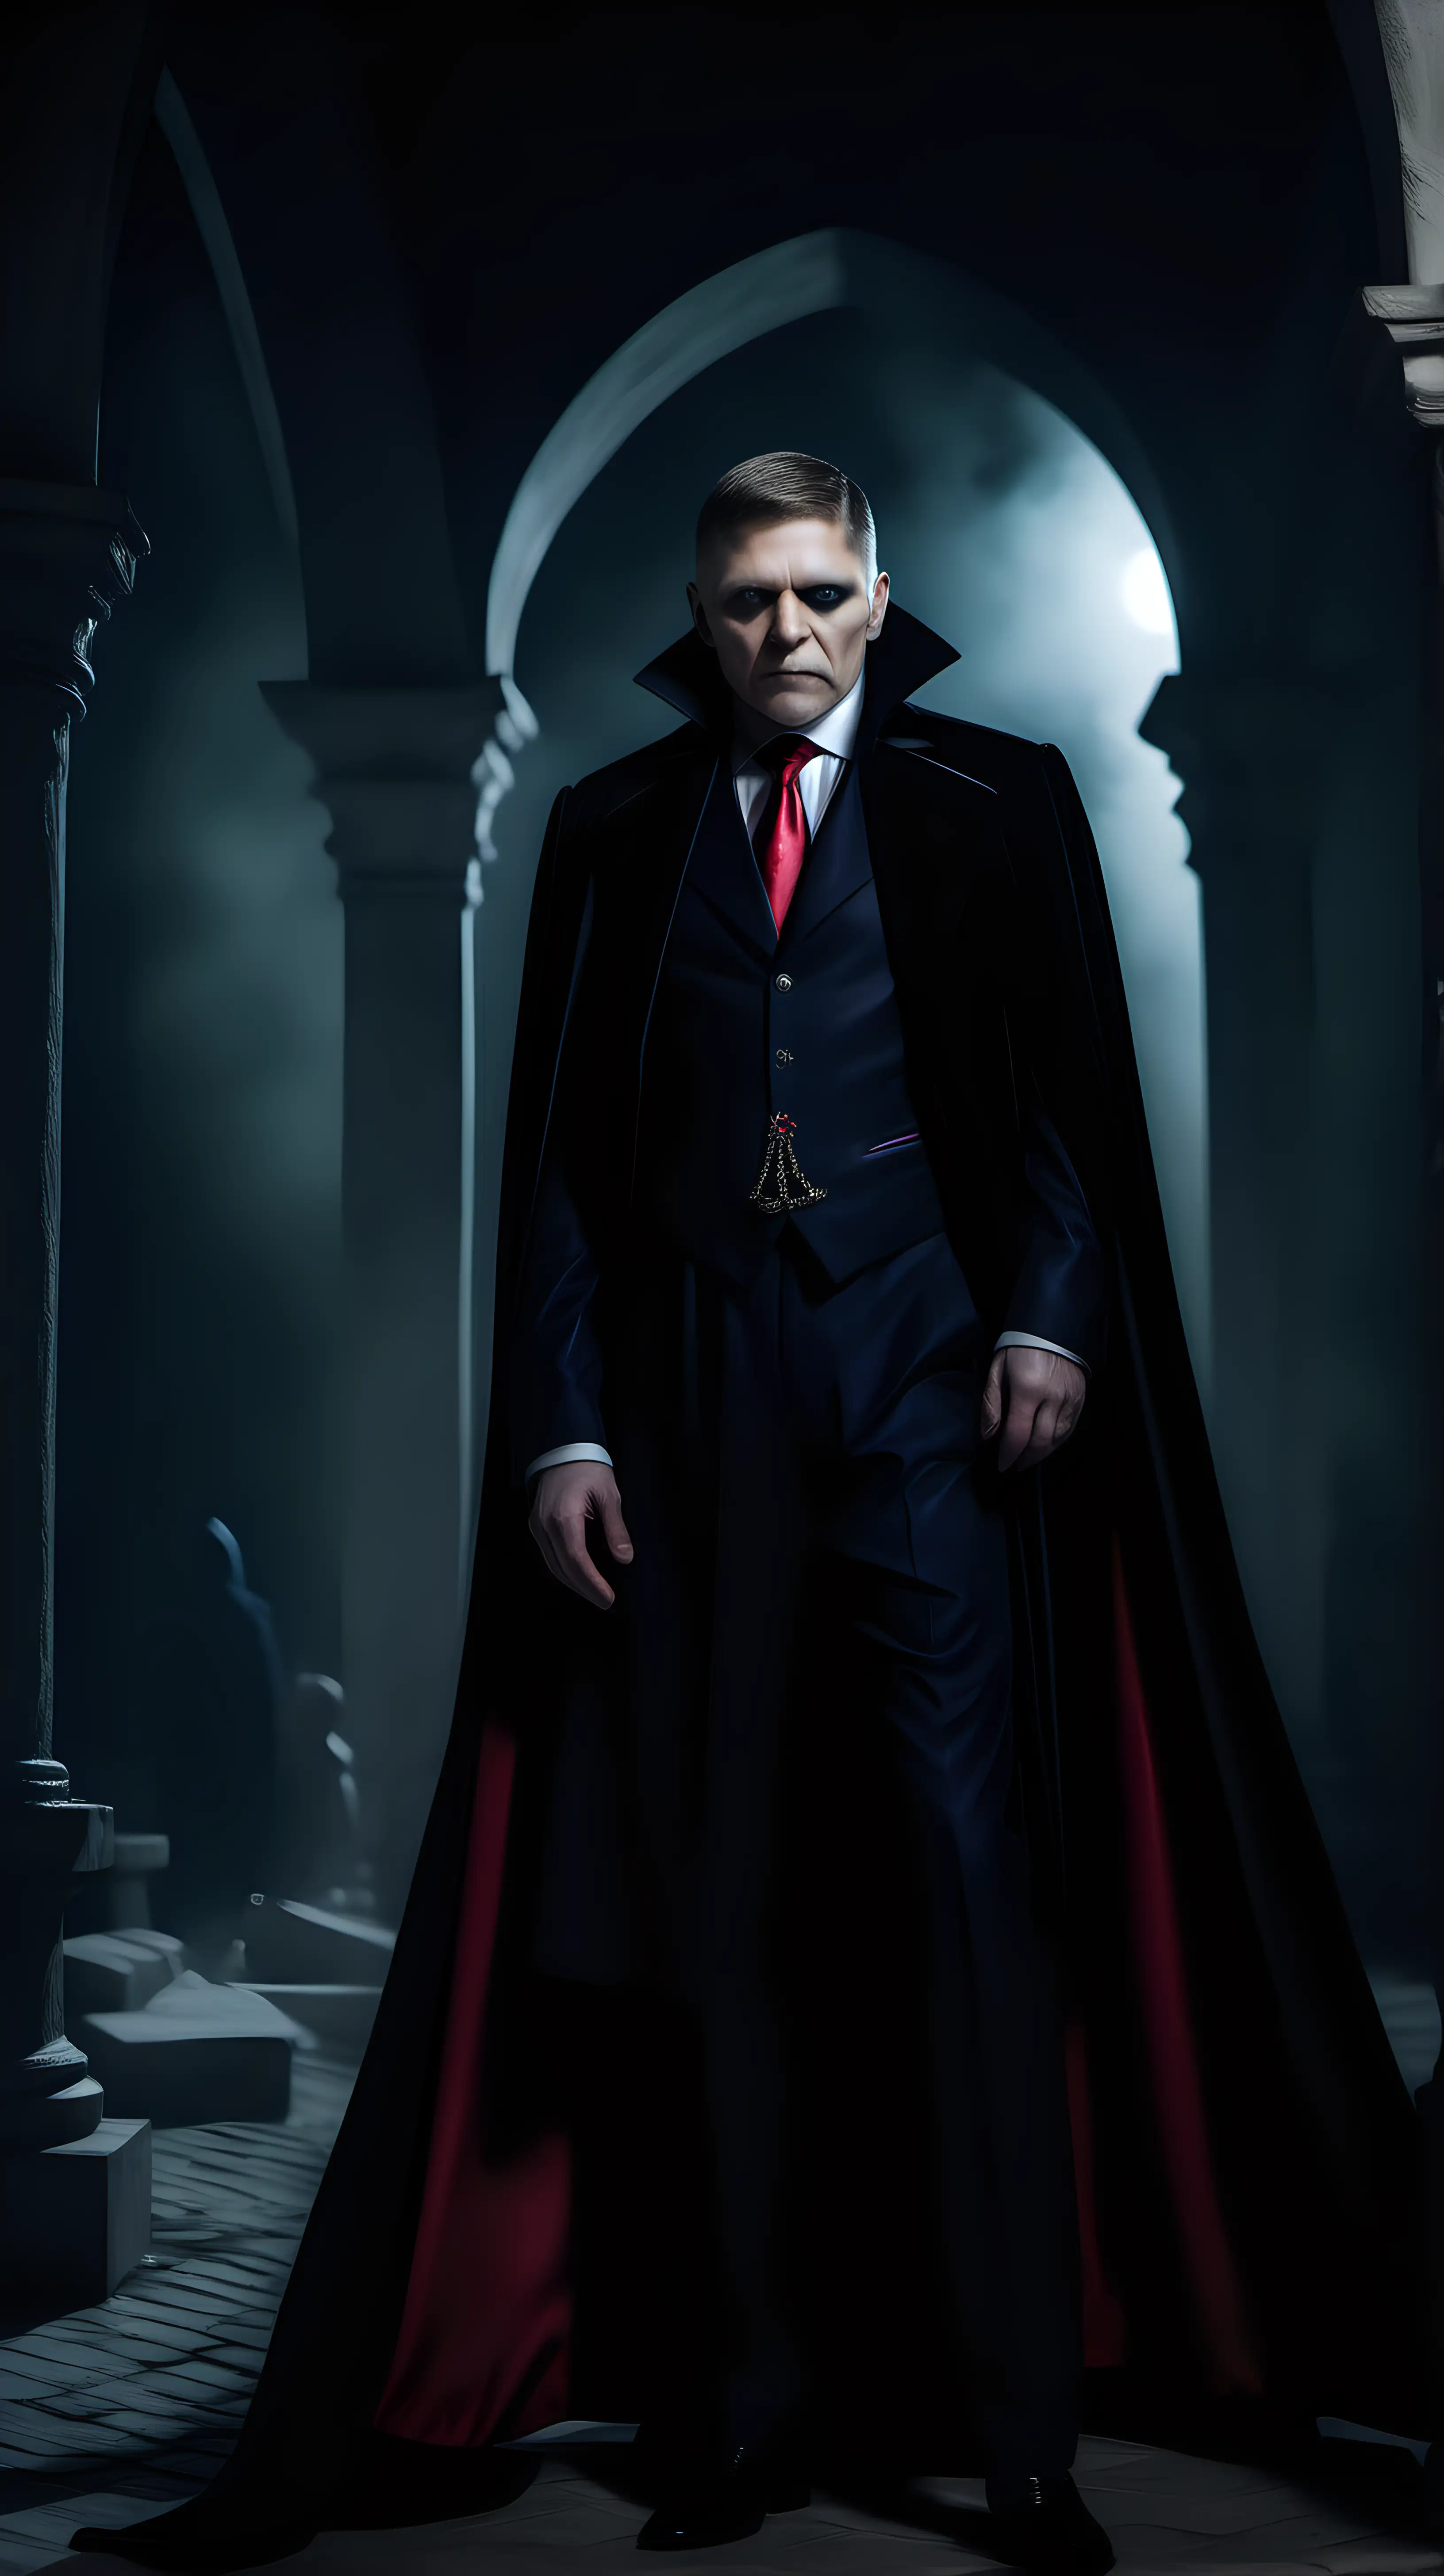 Robert Fico strikes a pose as a count Dracula. very dramatic, cinematic atmosphere, ultrarealistic 8k UHD